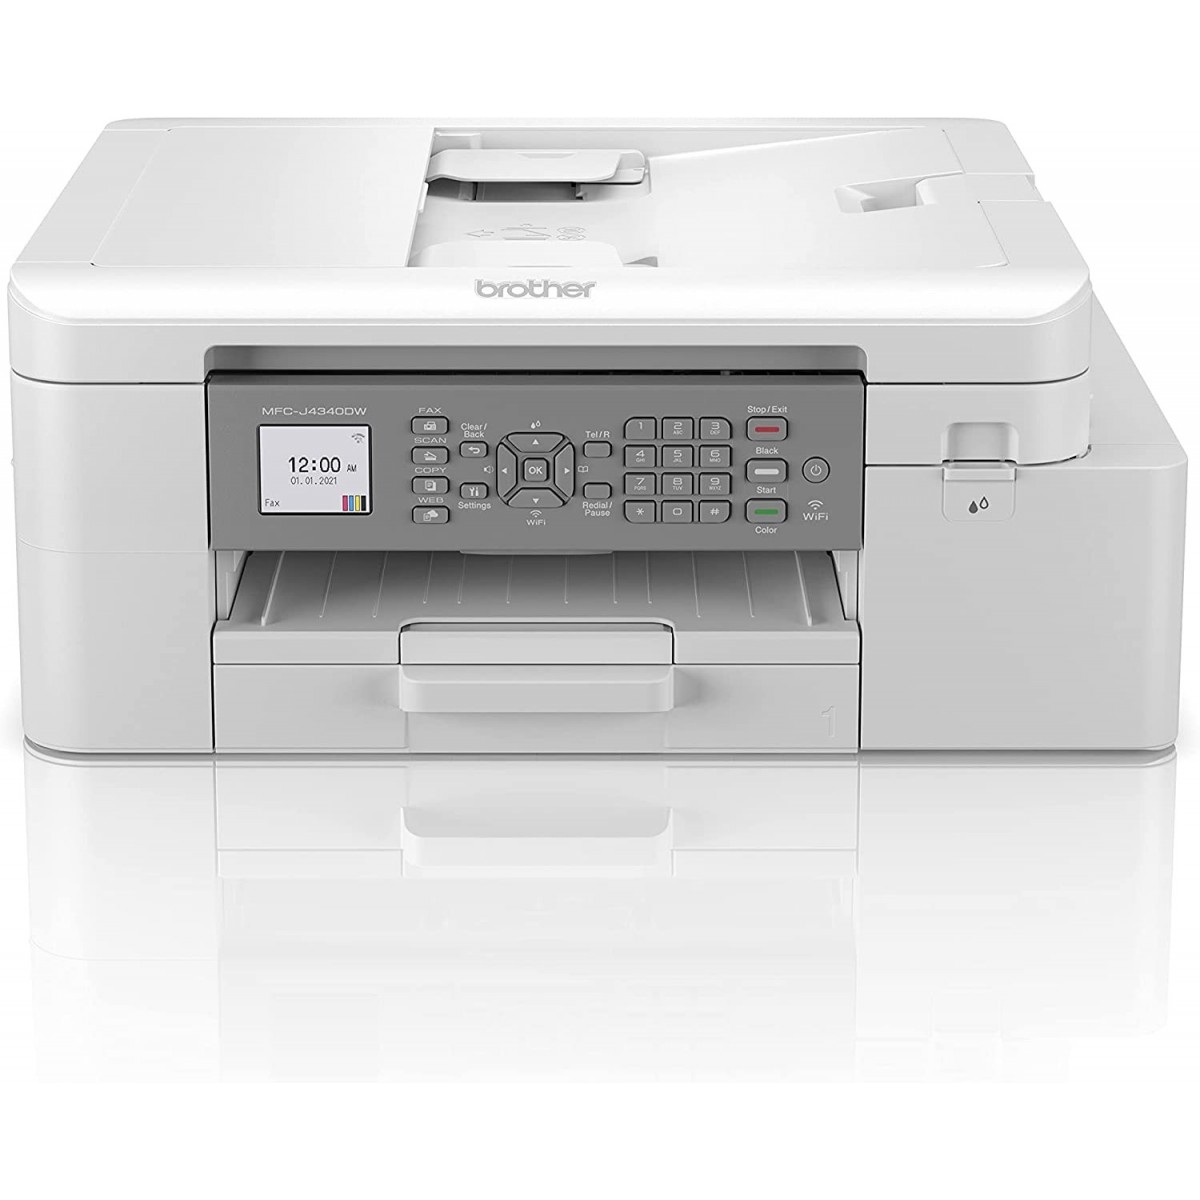 Brother MFC-J4340DWE 4-in-1 A4 Kopie-Scan-Fax - Fax